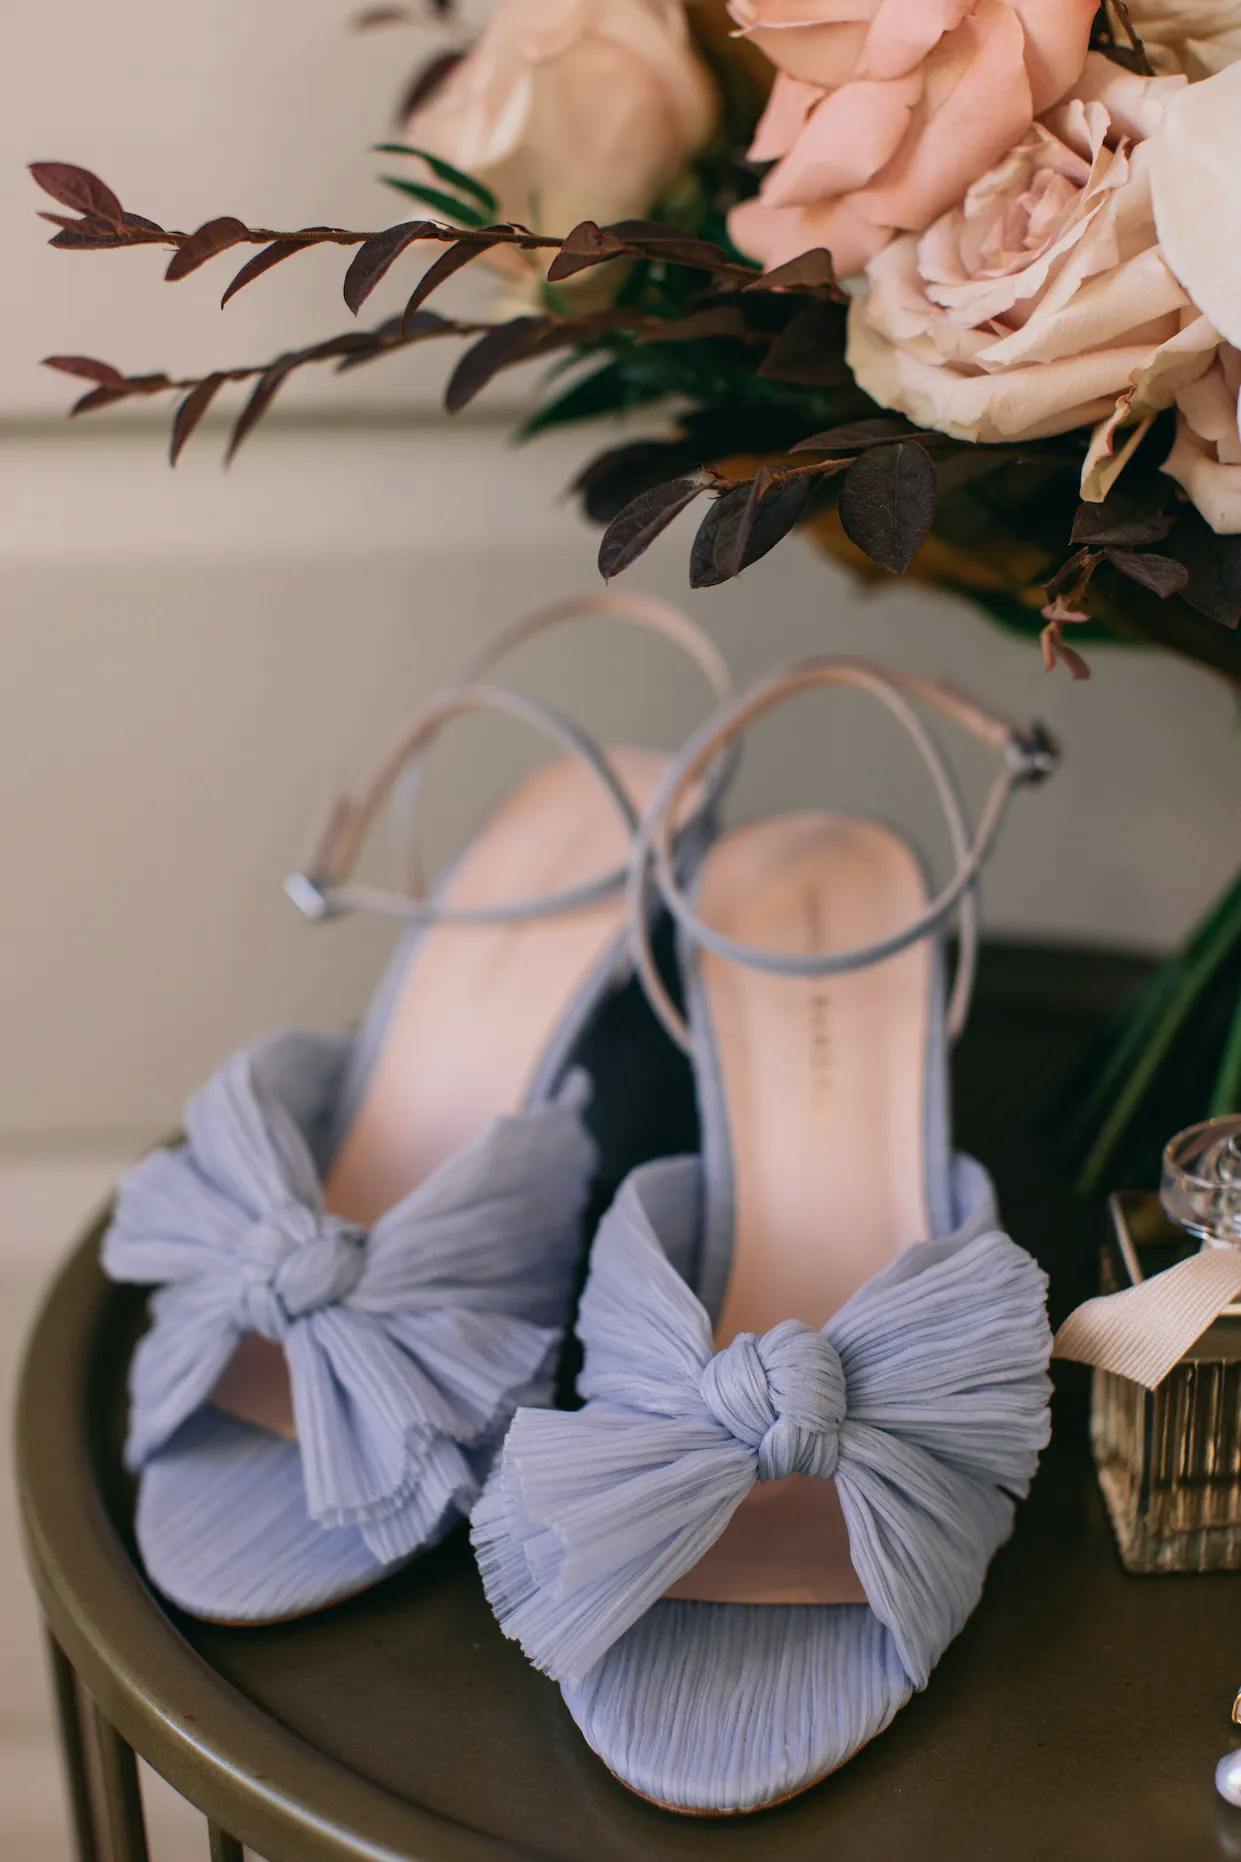 A close-up image of light blue high-heeled sandals with large fabric bows on the front. The sandals are displayed on a round table next to a bouquet of pastel roses and greenery and a small bottle of perfume. The background is softly blurred.